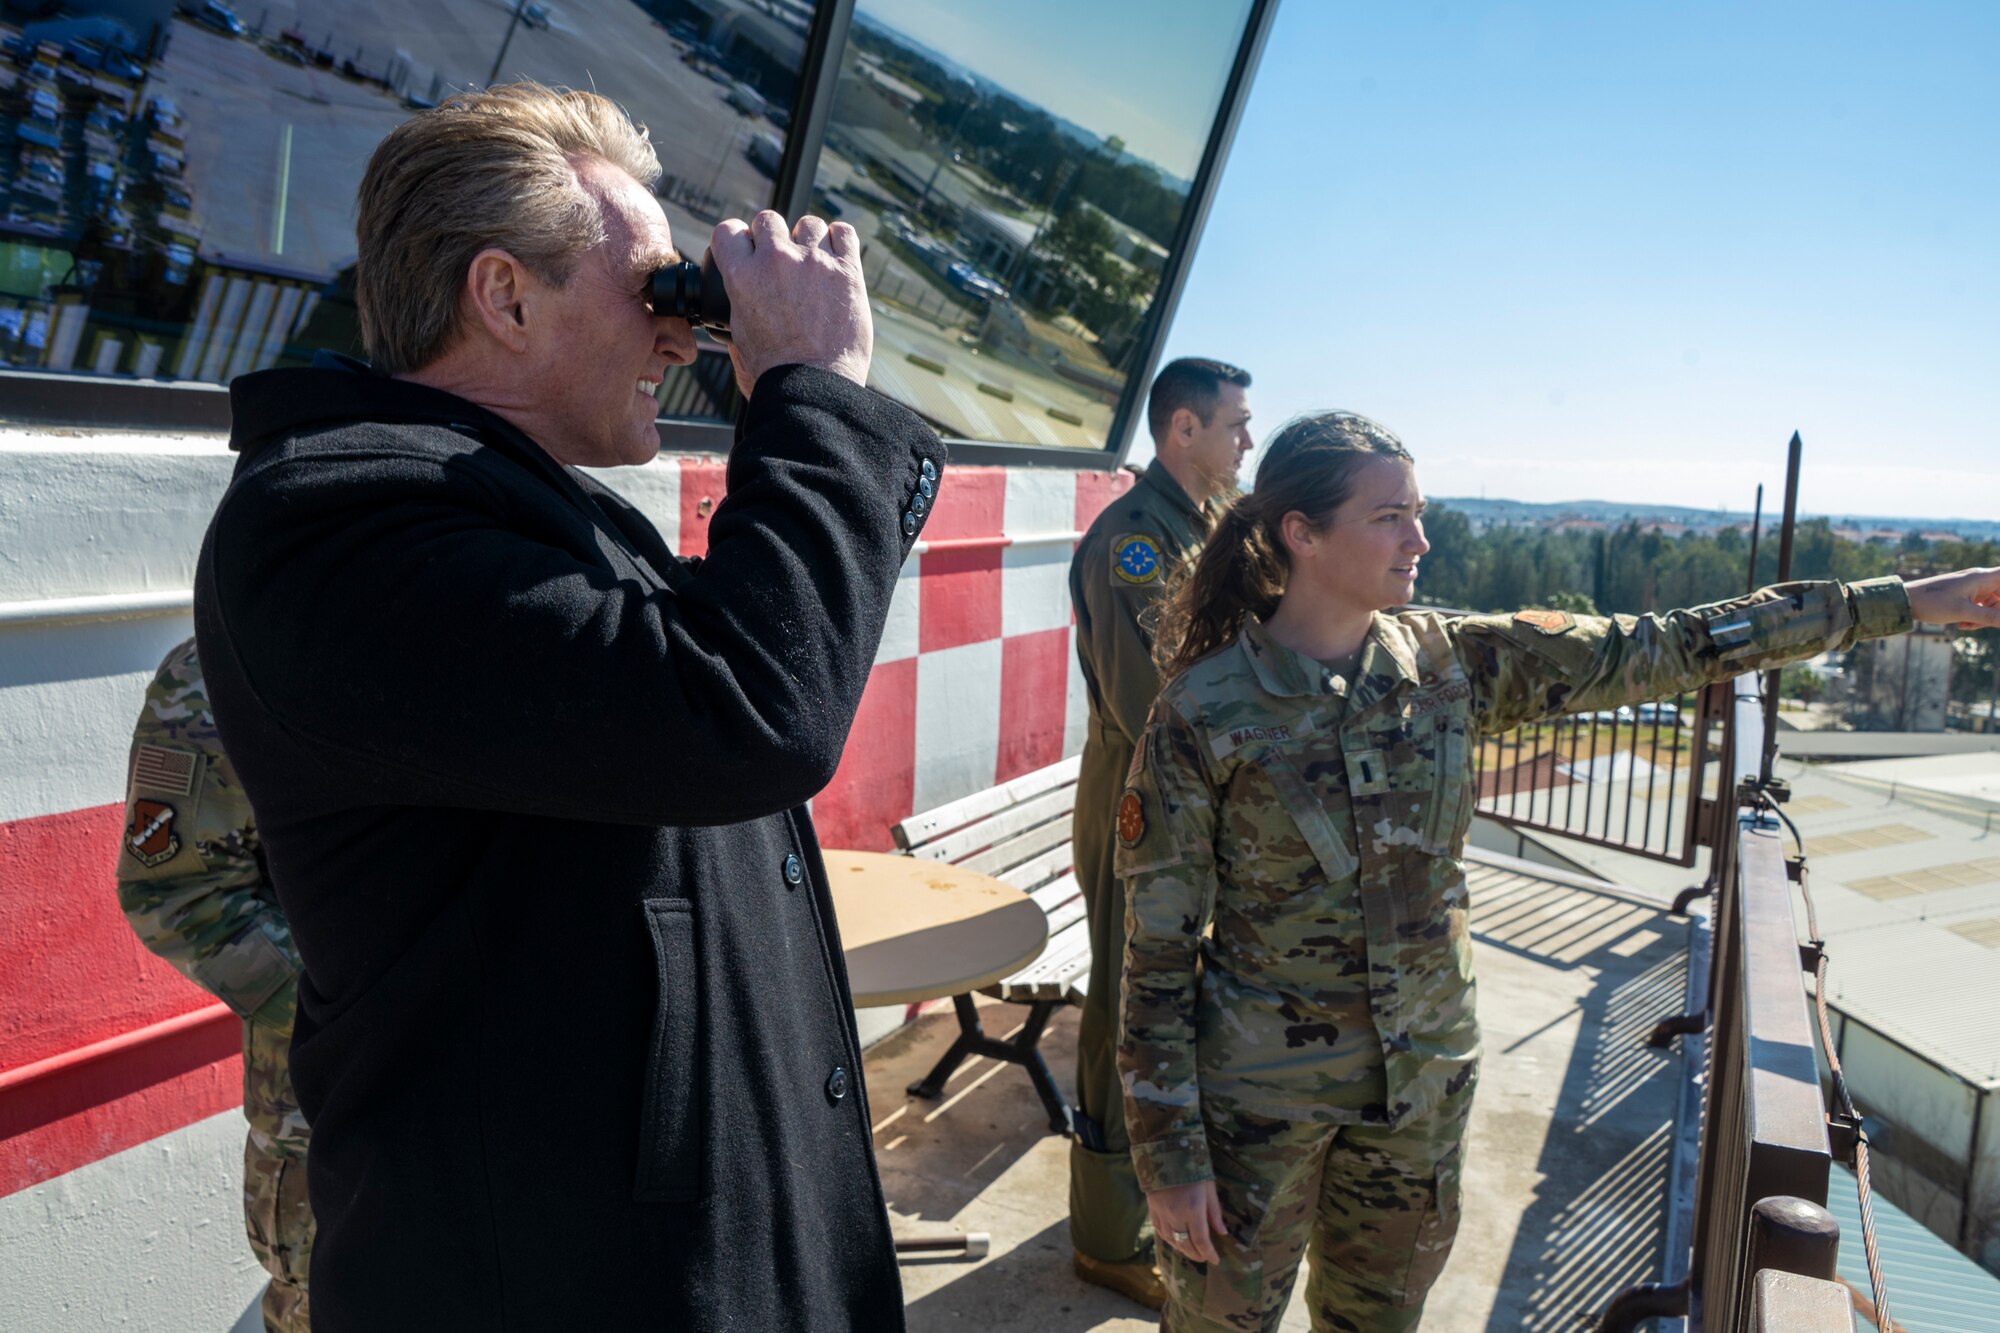 U.S. Ambassador Jeffry Flake, U.S. Ambassador to Türkiye, left, observes the airfield through binoculars while 1st Lt. Alisa Wagner, 39th Operations Support Squadron Airfield Operations Flight director of operations, points towards the flightline during his visit to Incirlik Air Base, Türkiye, Feb 13, 2023. Ambassador Flake visited Incirlik AB to discuss the recent earthquakes that struck central-southern Türkiye on Feb 6, 2023, and see the humanitarian support efforts first-hand. As Ambassador to Türkiye, Flake holds the highest civilian position as The Chief of Mission, and impacts the communication and resources of U.S. personnel, advancing the U.S. foreign policy goals. As a fellow NATO ally, the U.S. Government mobilized personnel to assist Türkiye in their response efforts. (U.S. Air Force photo by Senior Airman David D. McLoney)